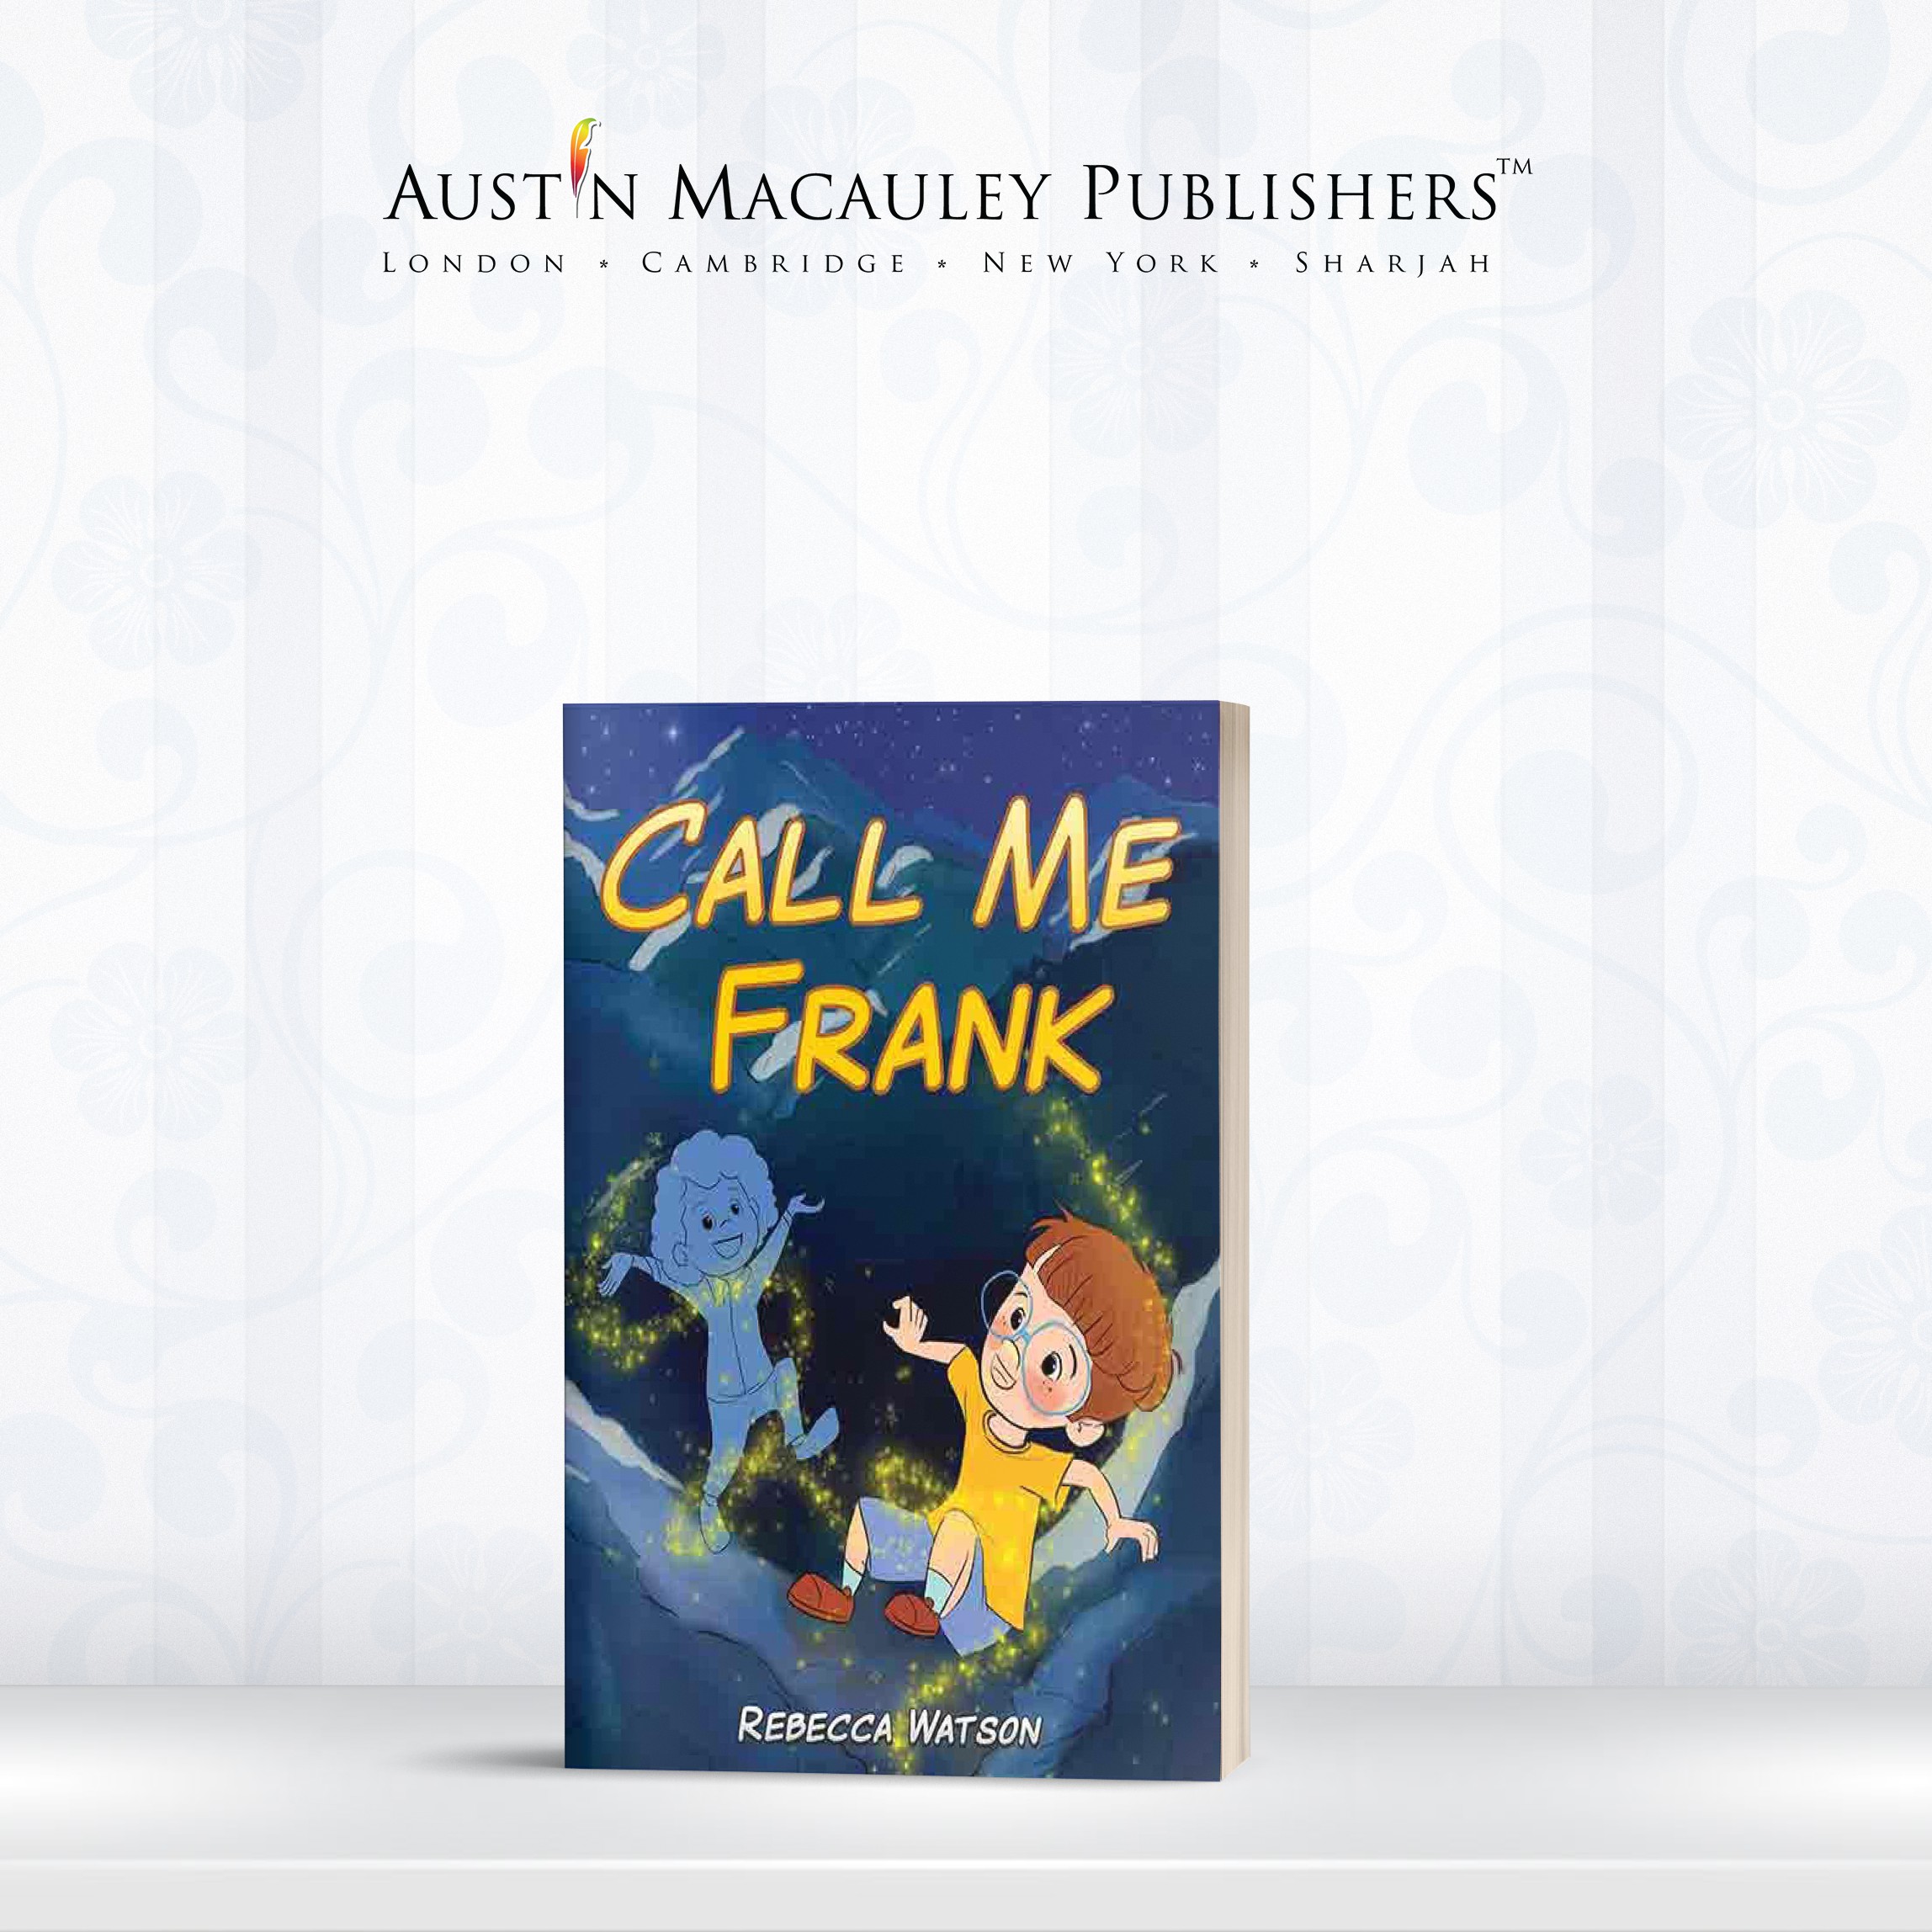 Call Me Frank by Rebecca Watson Gets Featured by The SE Voice